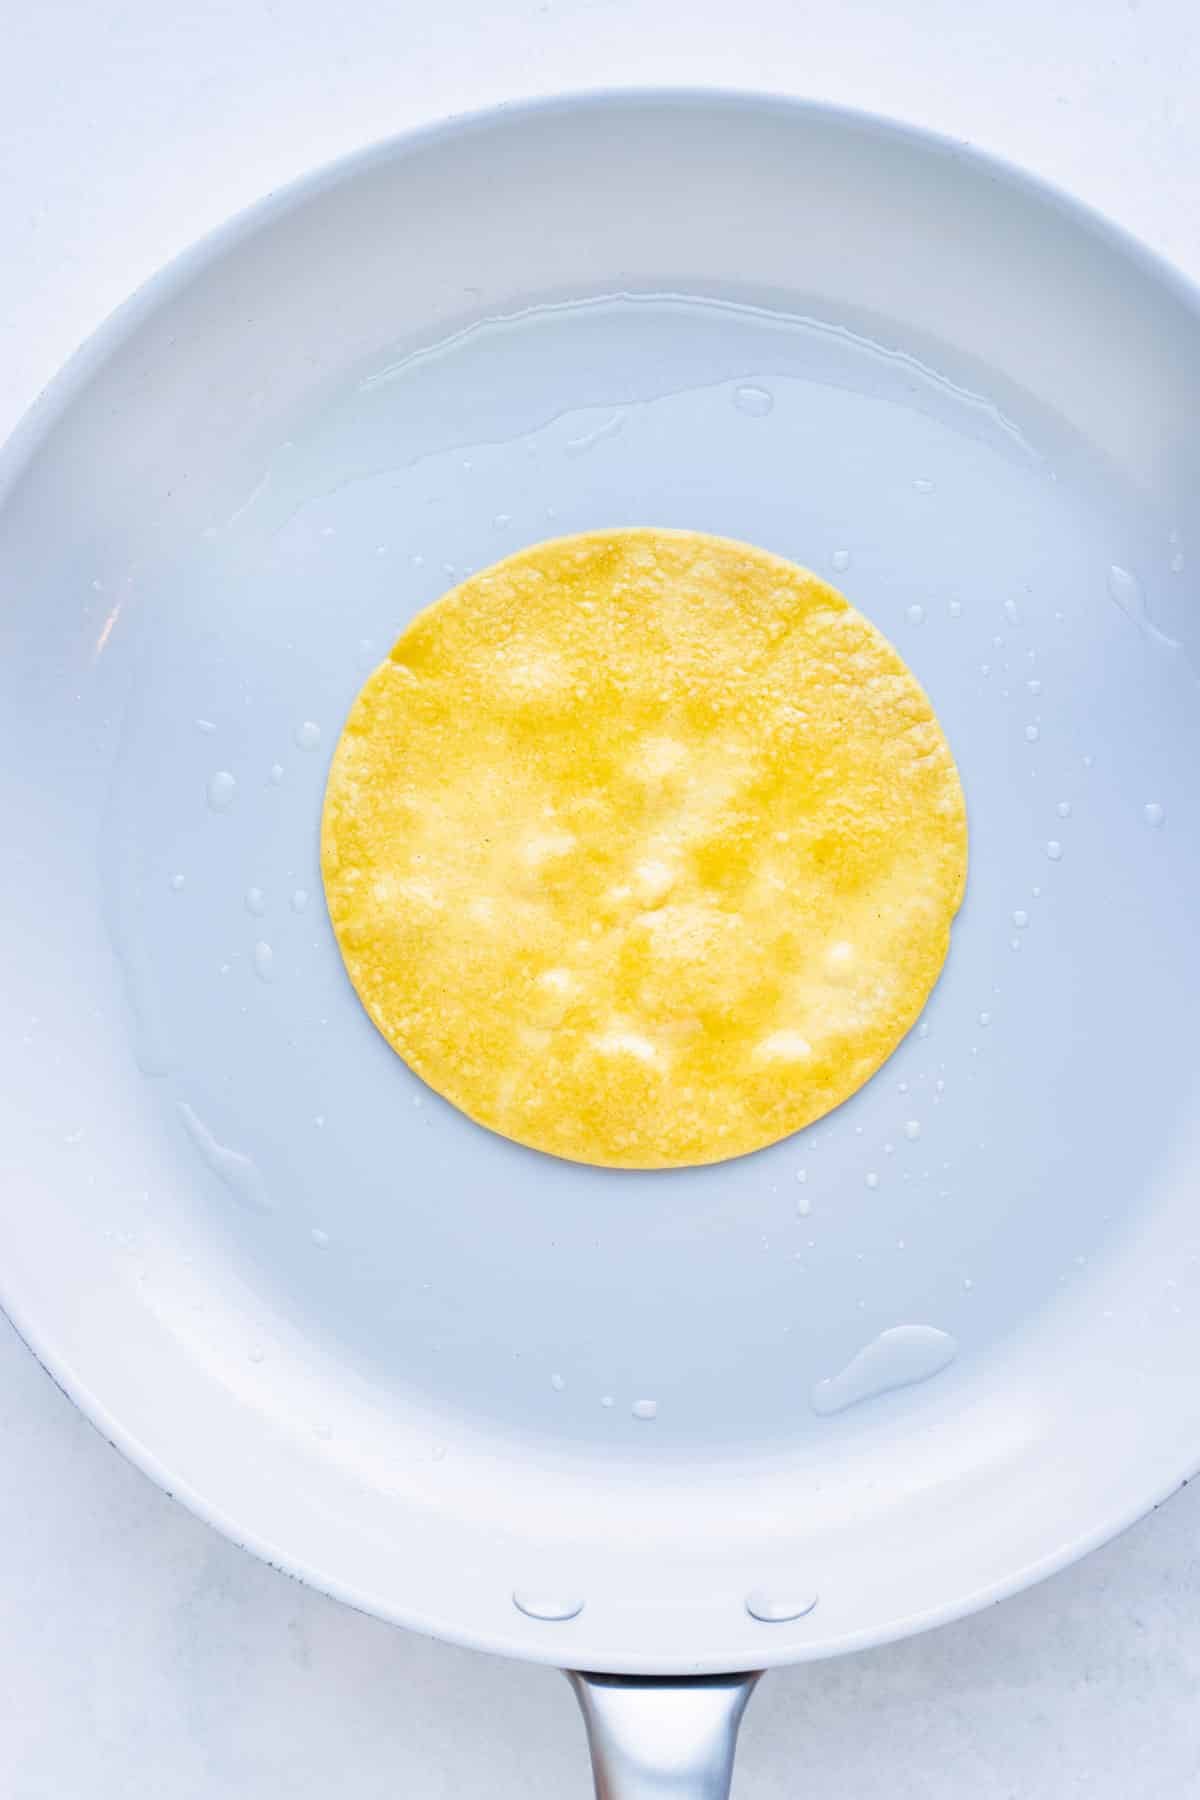 Corn tortillas are cooked on a skillet before being filled.